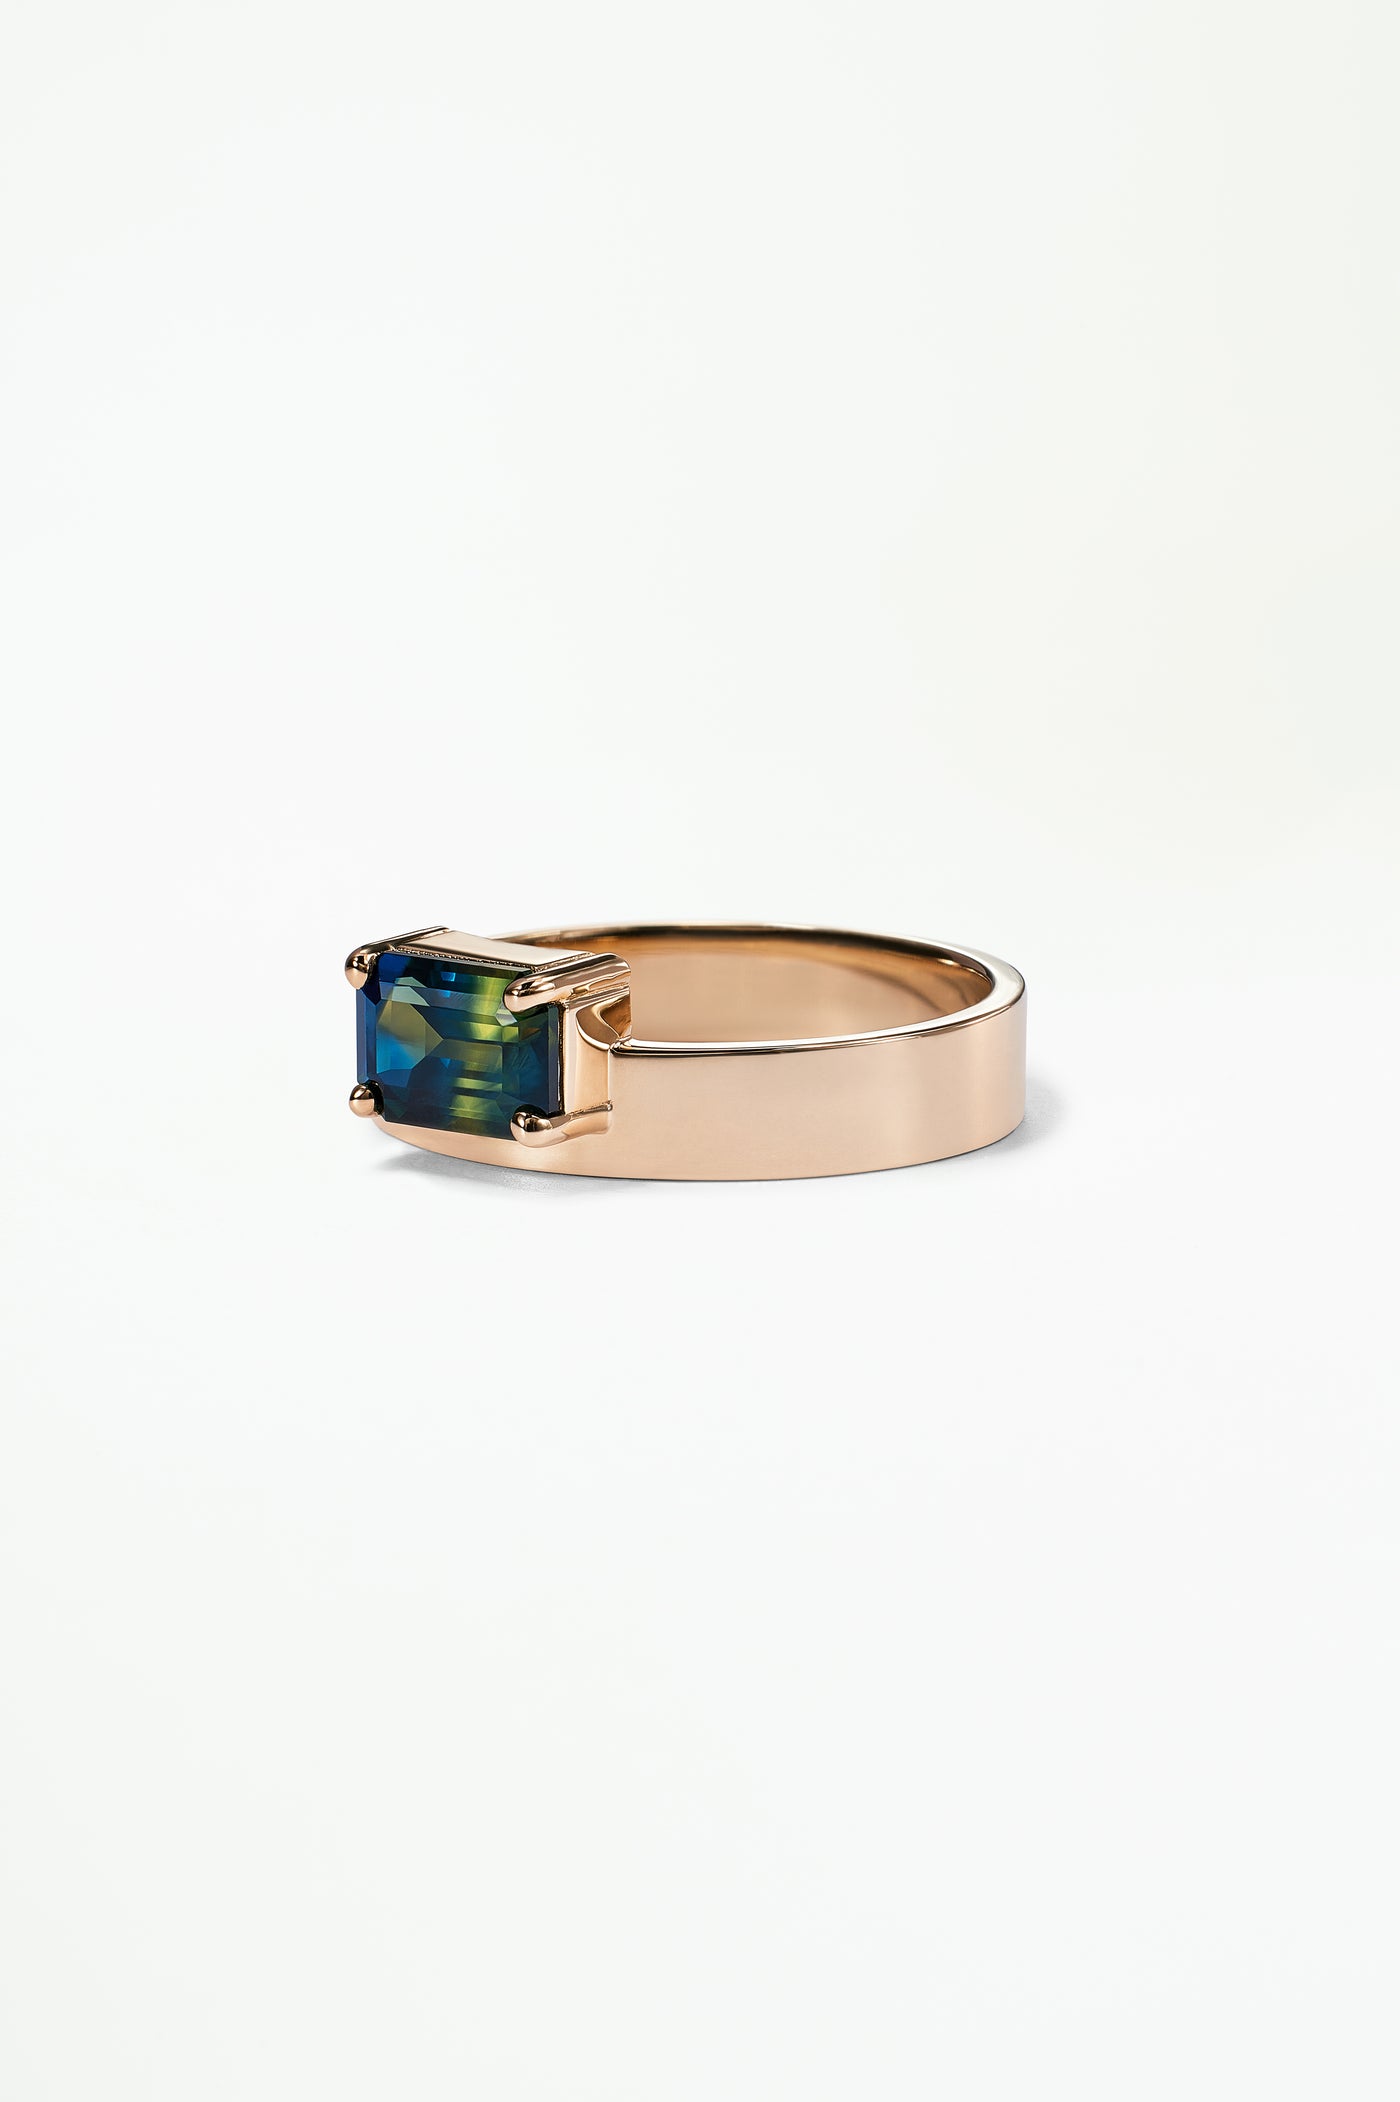 One of a Kind Emerald Cut Sapphire Monolith Ring No. 8